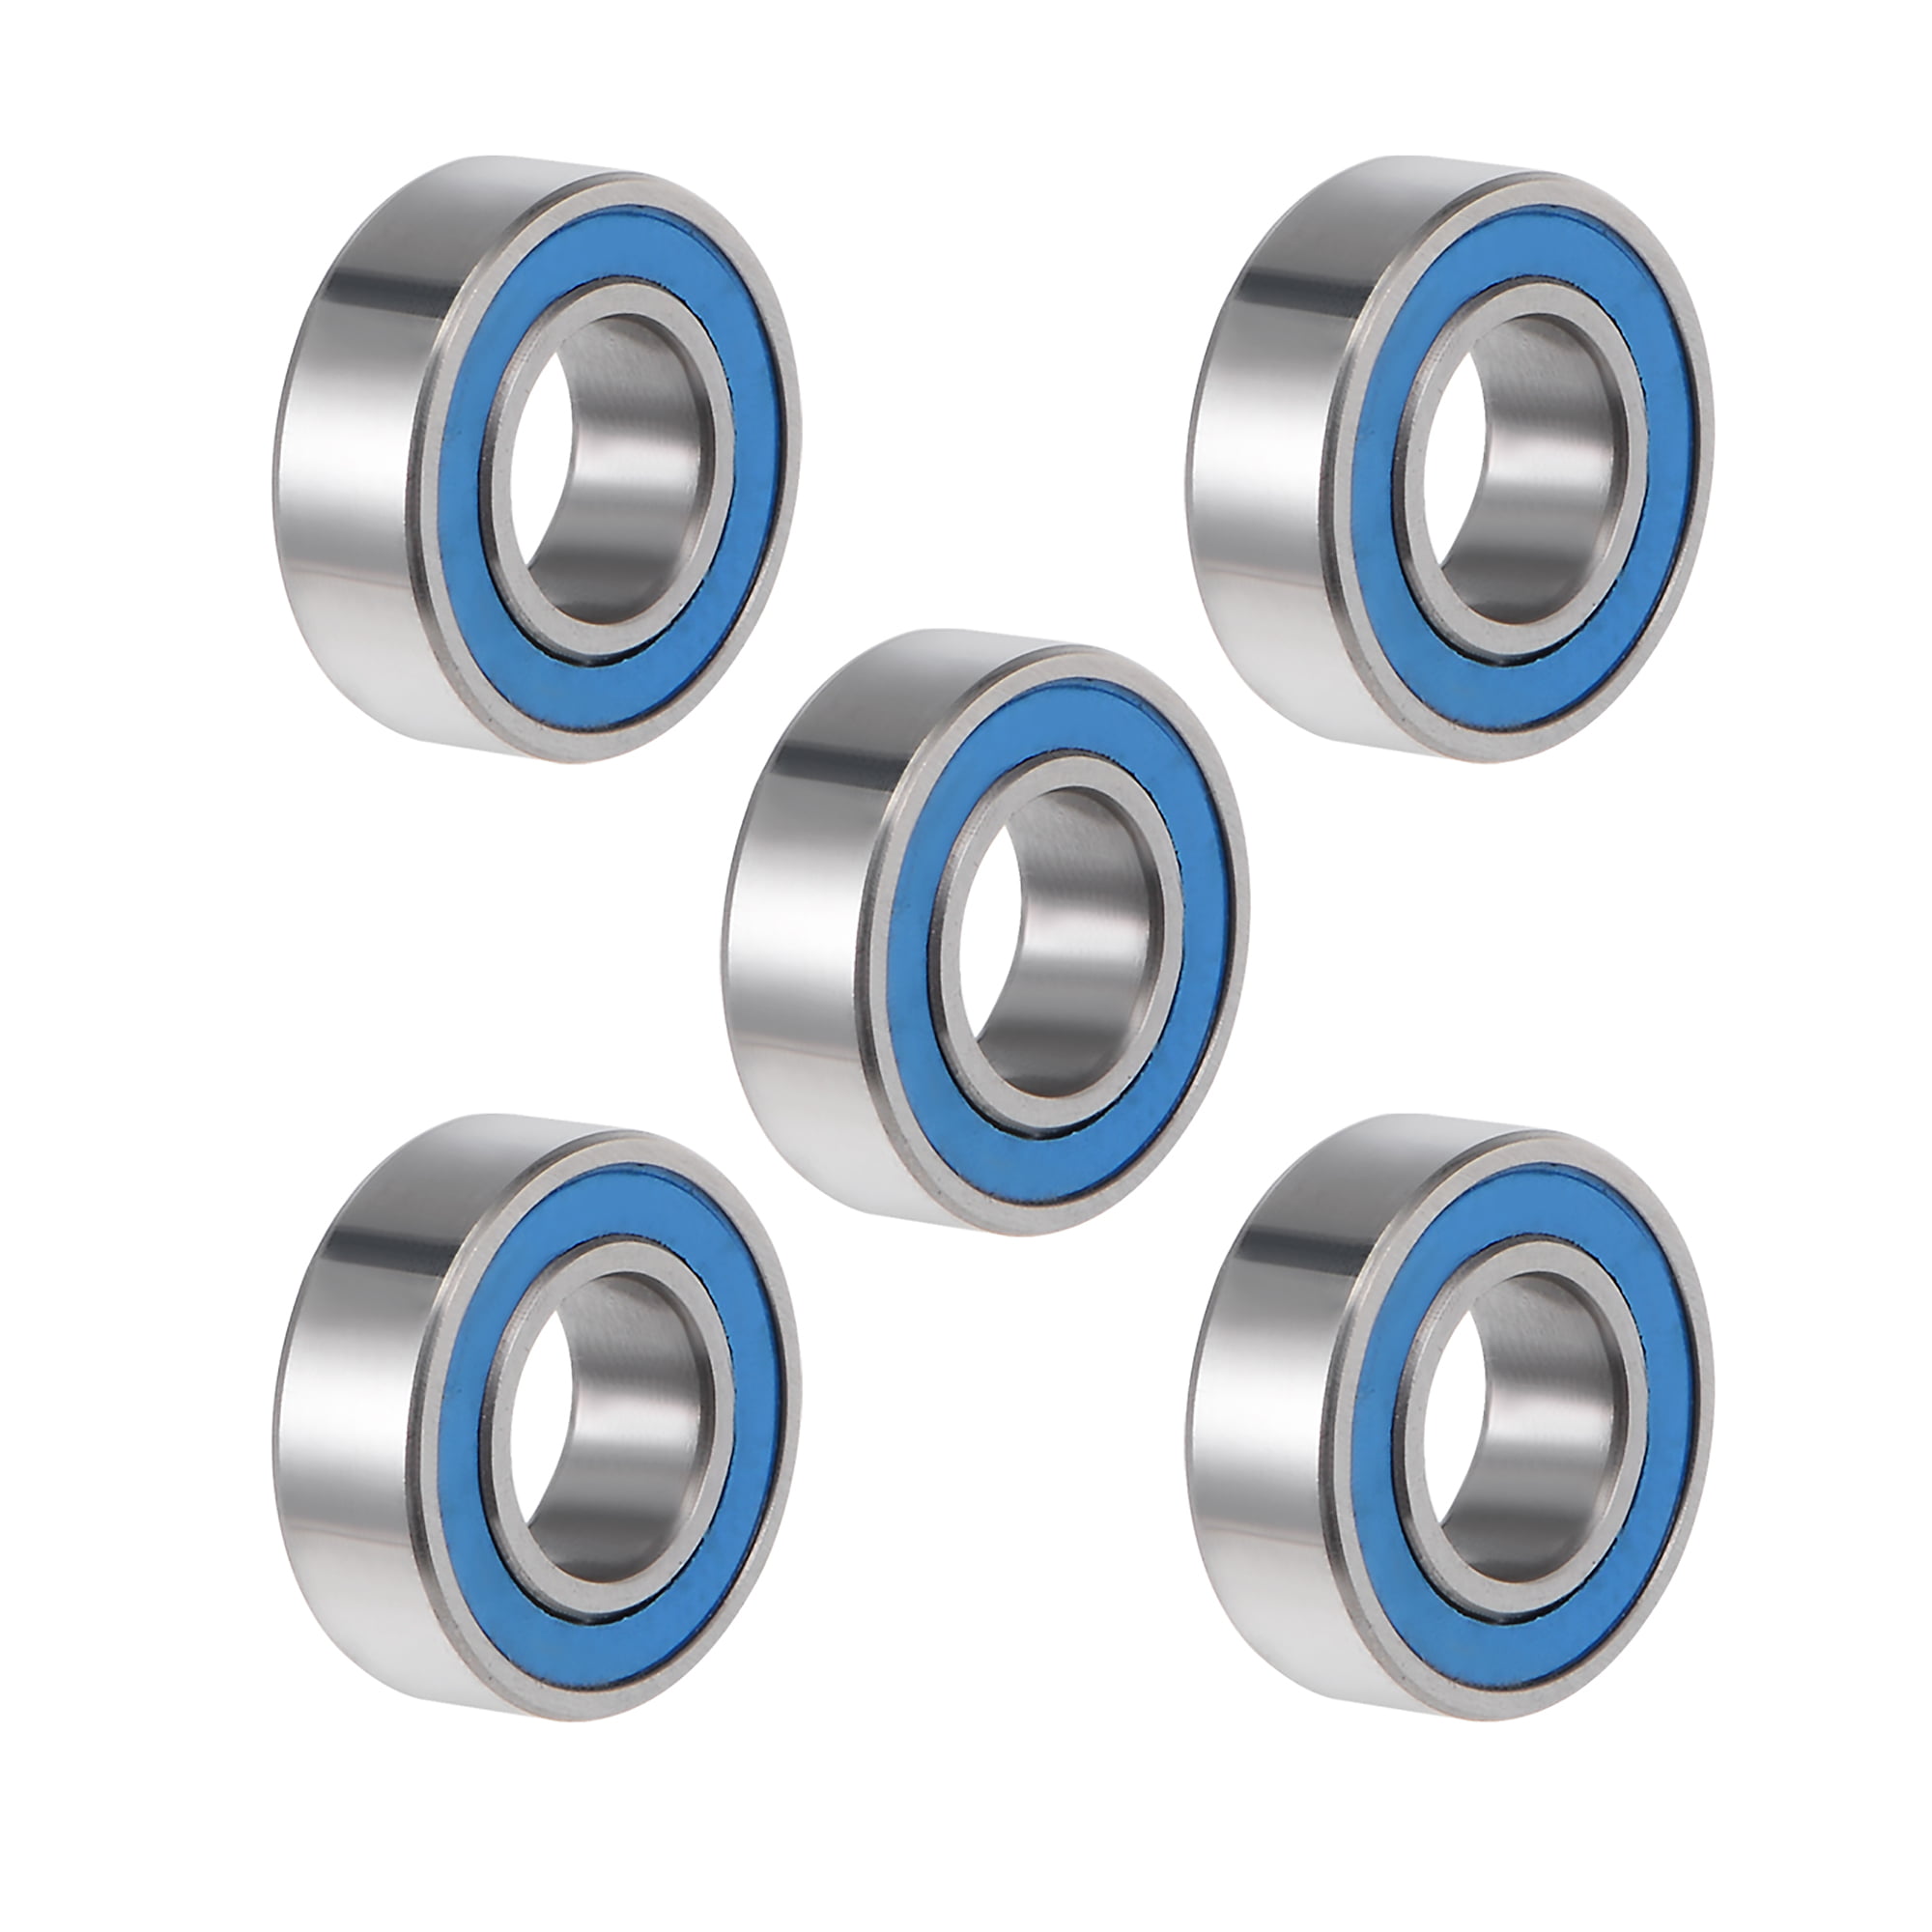 10pcs MR126-2RS 6 x12 x4mm Deep Groove Ball Bearings Double Sealed Chrome Steel 